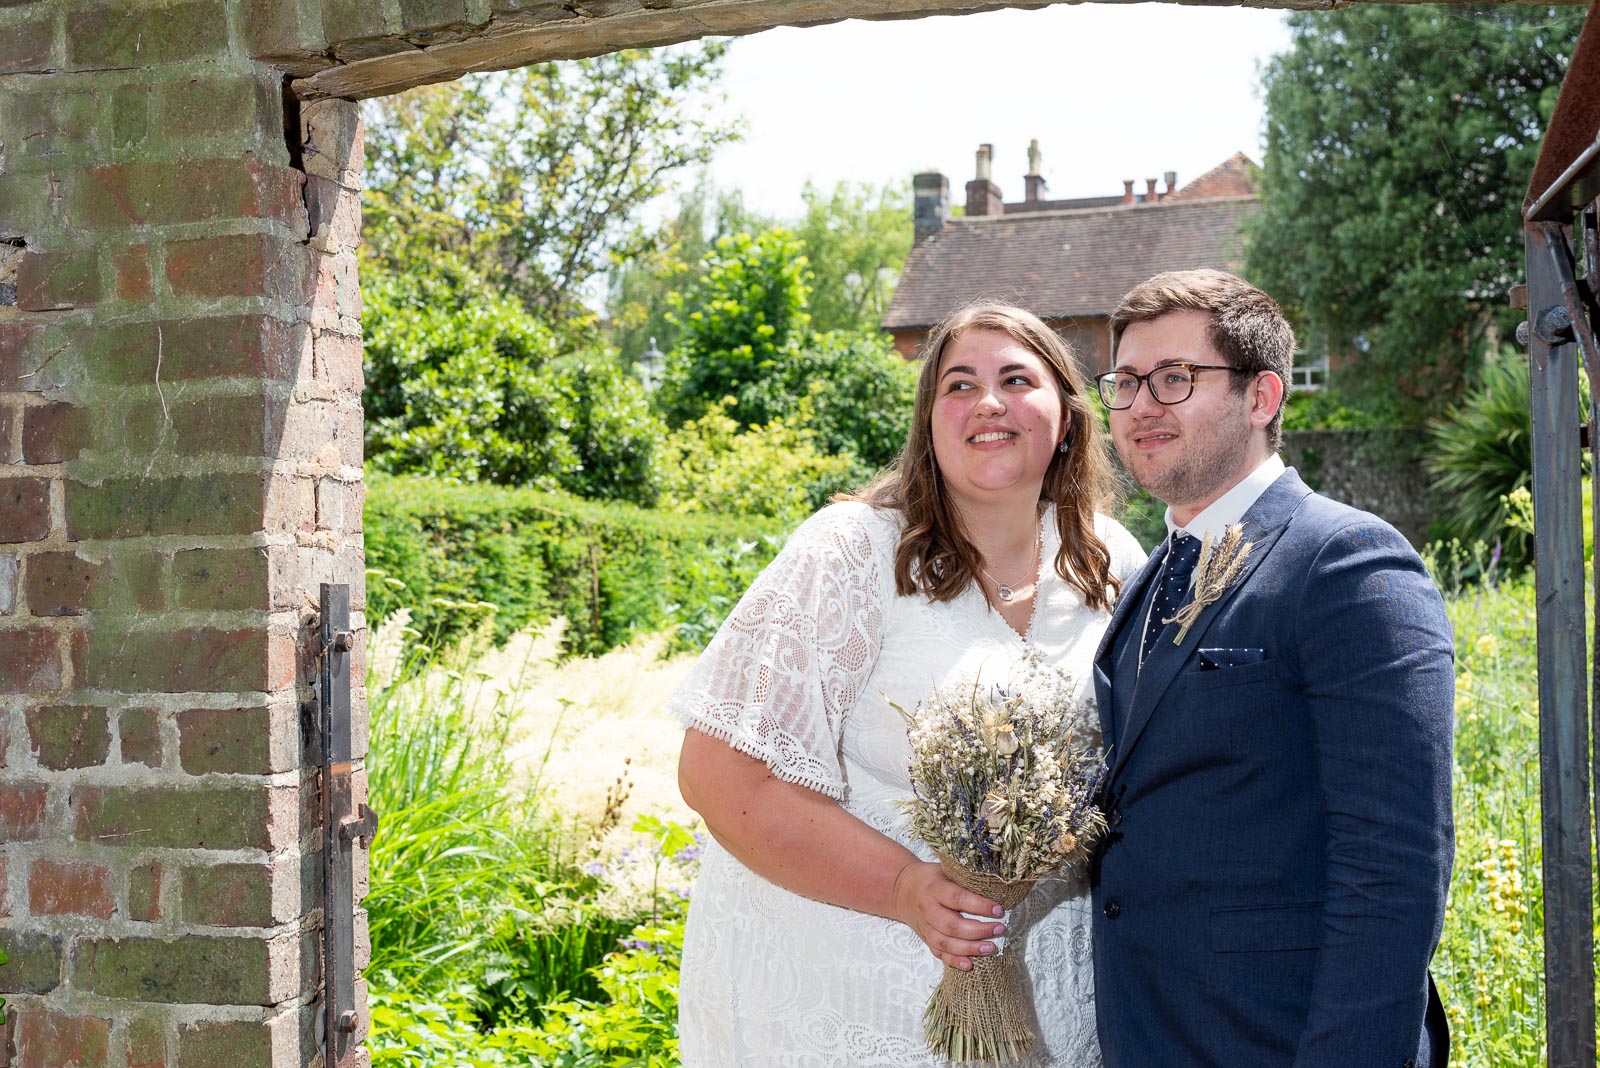 Sophie and Nathan pose in one of the arched at Southover Grange after their wedding in Lewes Register Office.